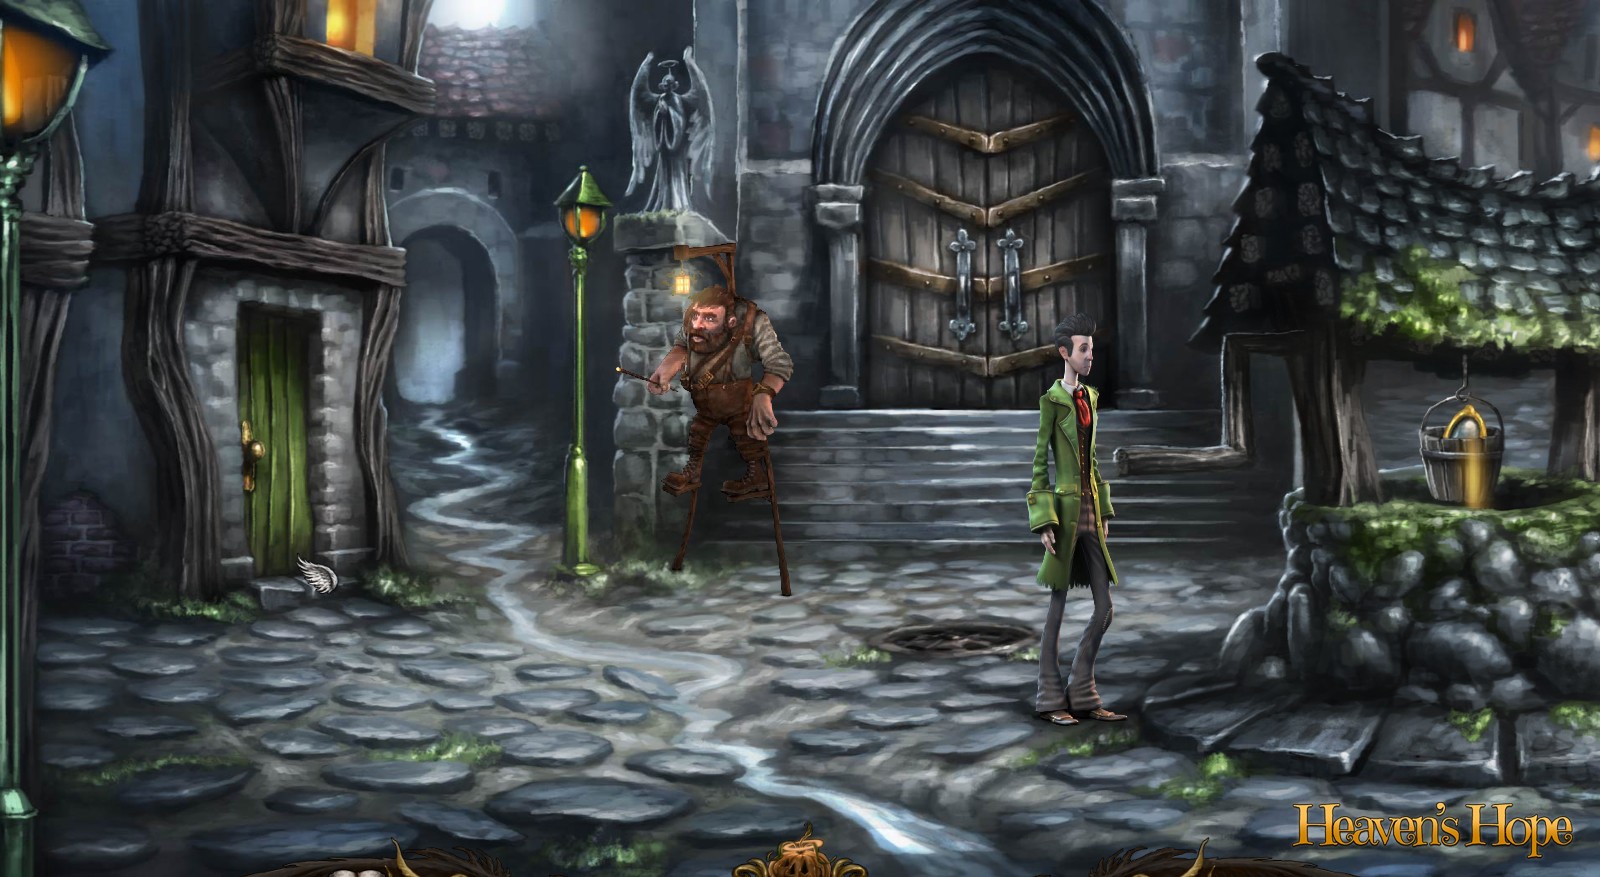 Point & Click Adventure Game Heaven's Hope Is Coming To Steam In Two  Weeks - Gamesear